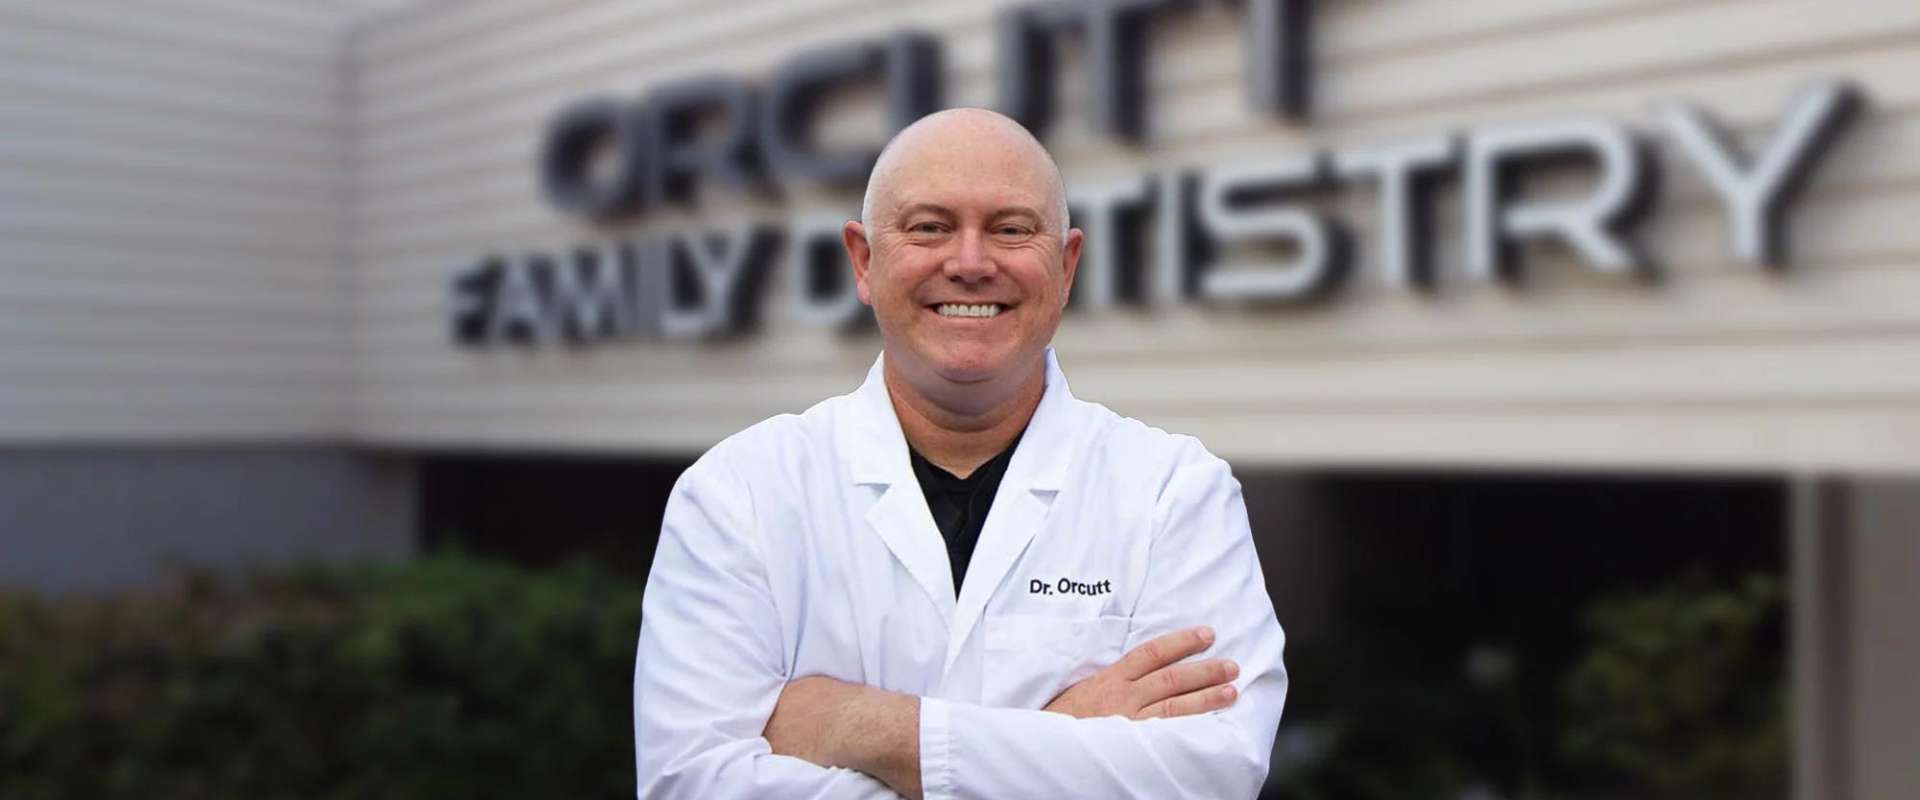 Dr. Brian Orcutt